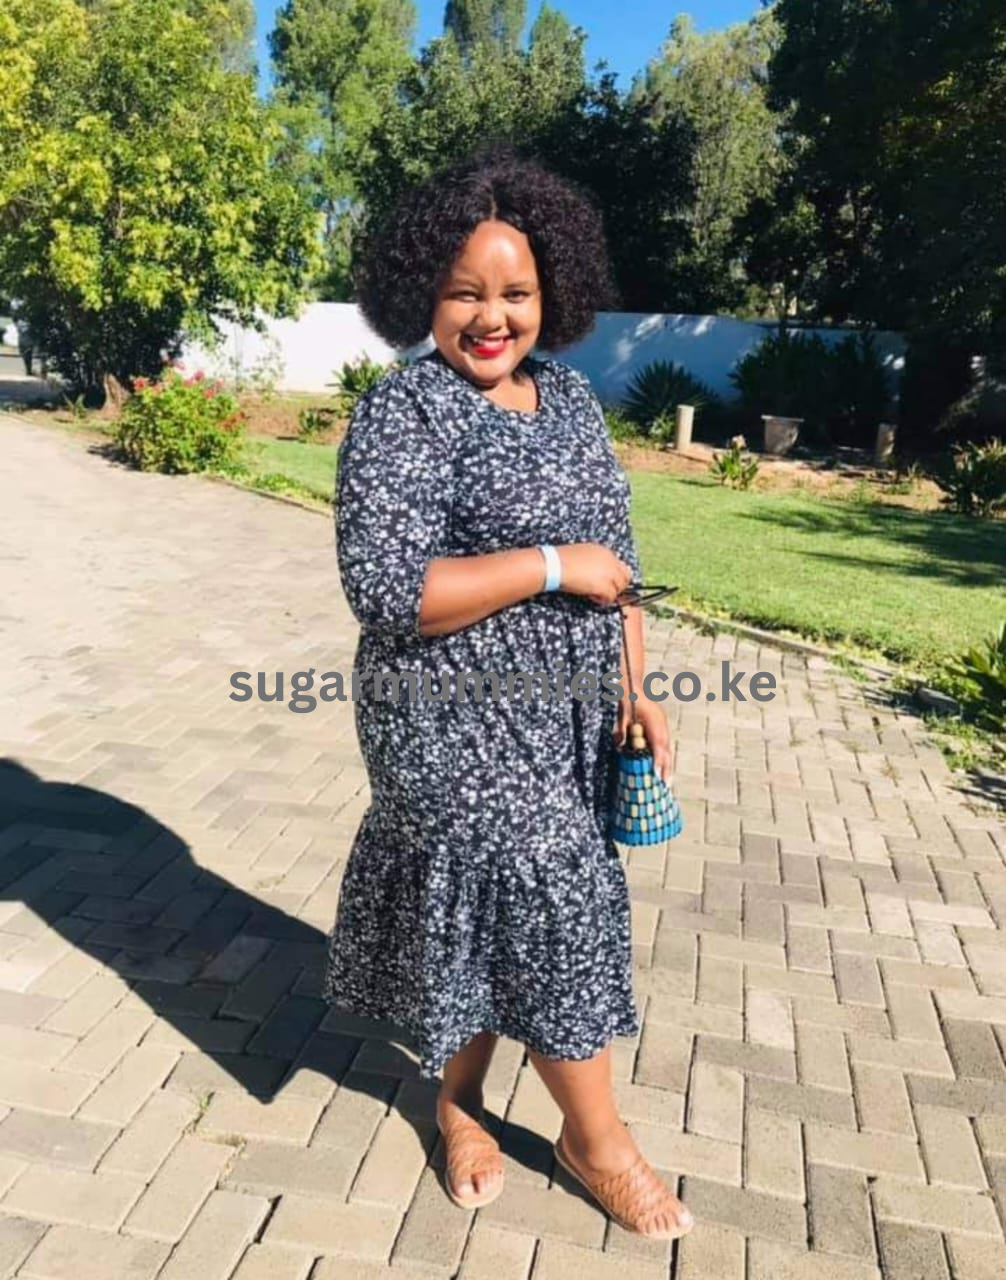 Stacy Sugarmummy in Nairobi Needs Love and Companionship,Seeking Mature Gentlemen for Connection